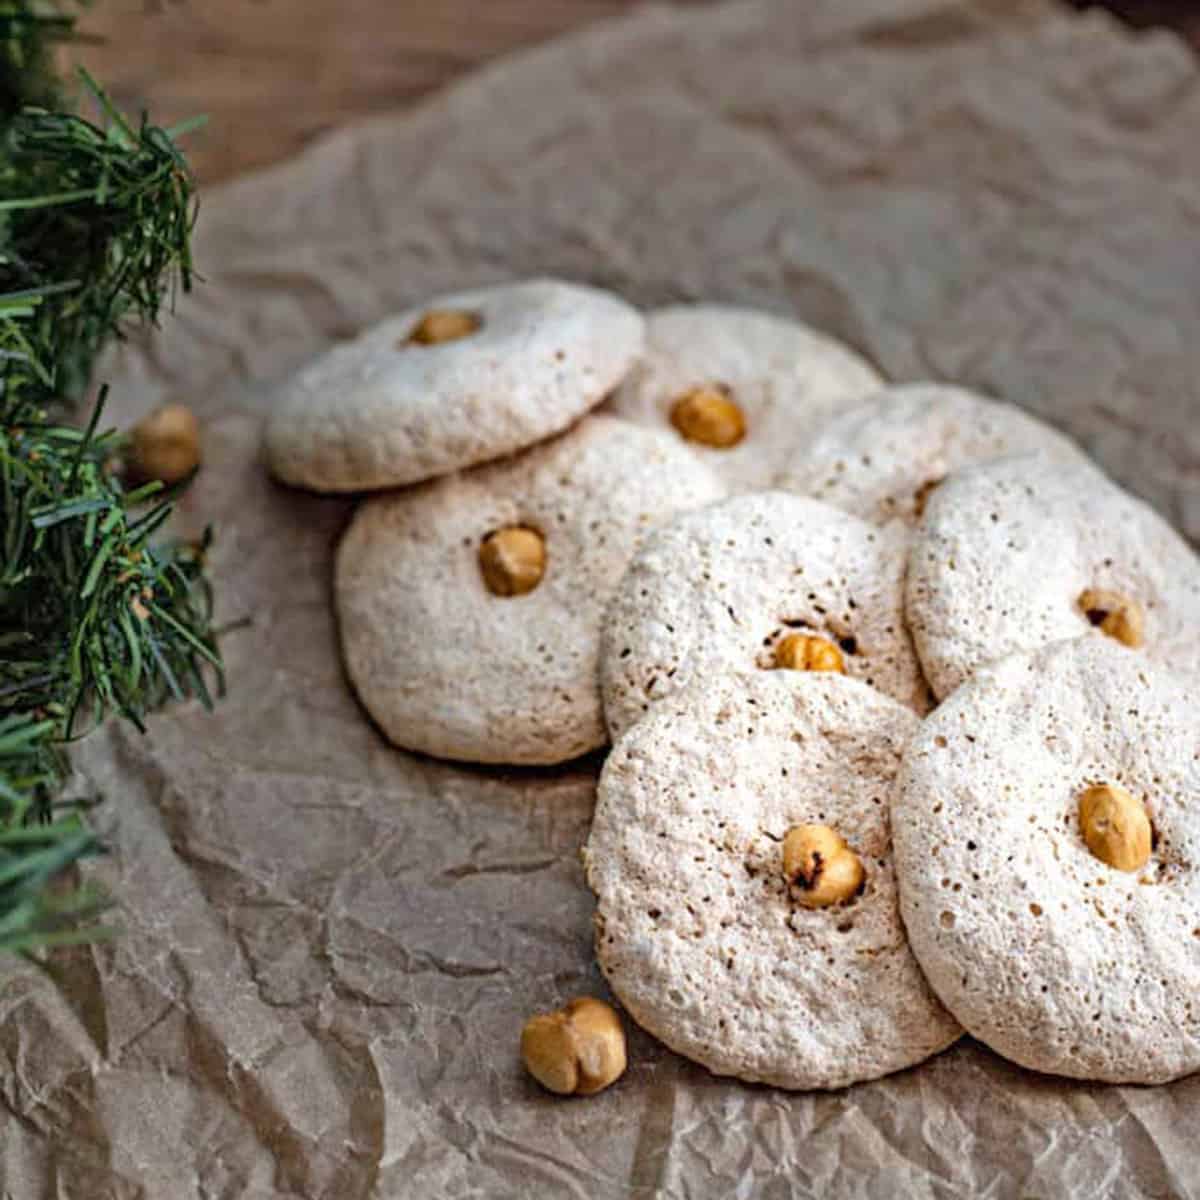 A group of round cookies with hazelnuts in the center.